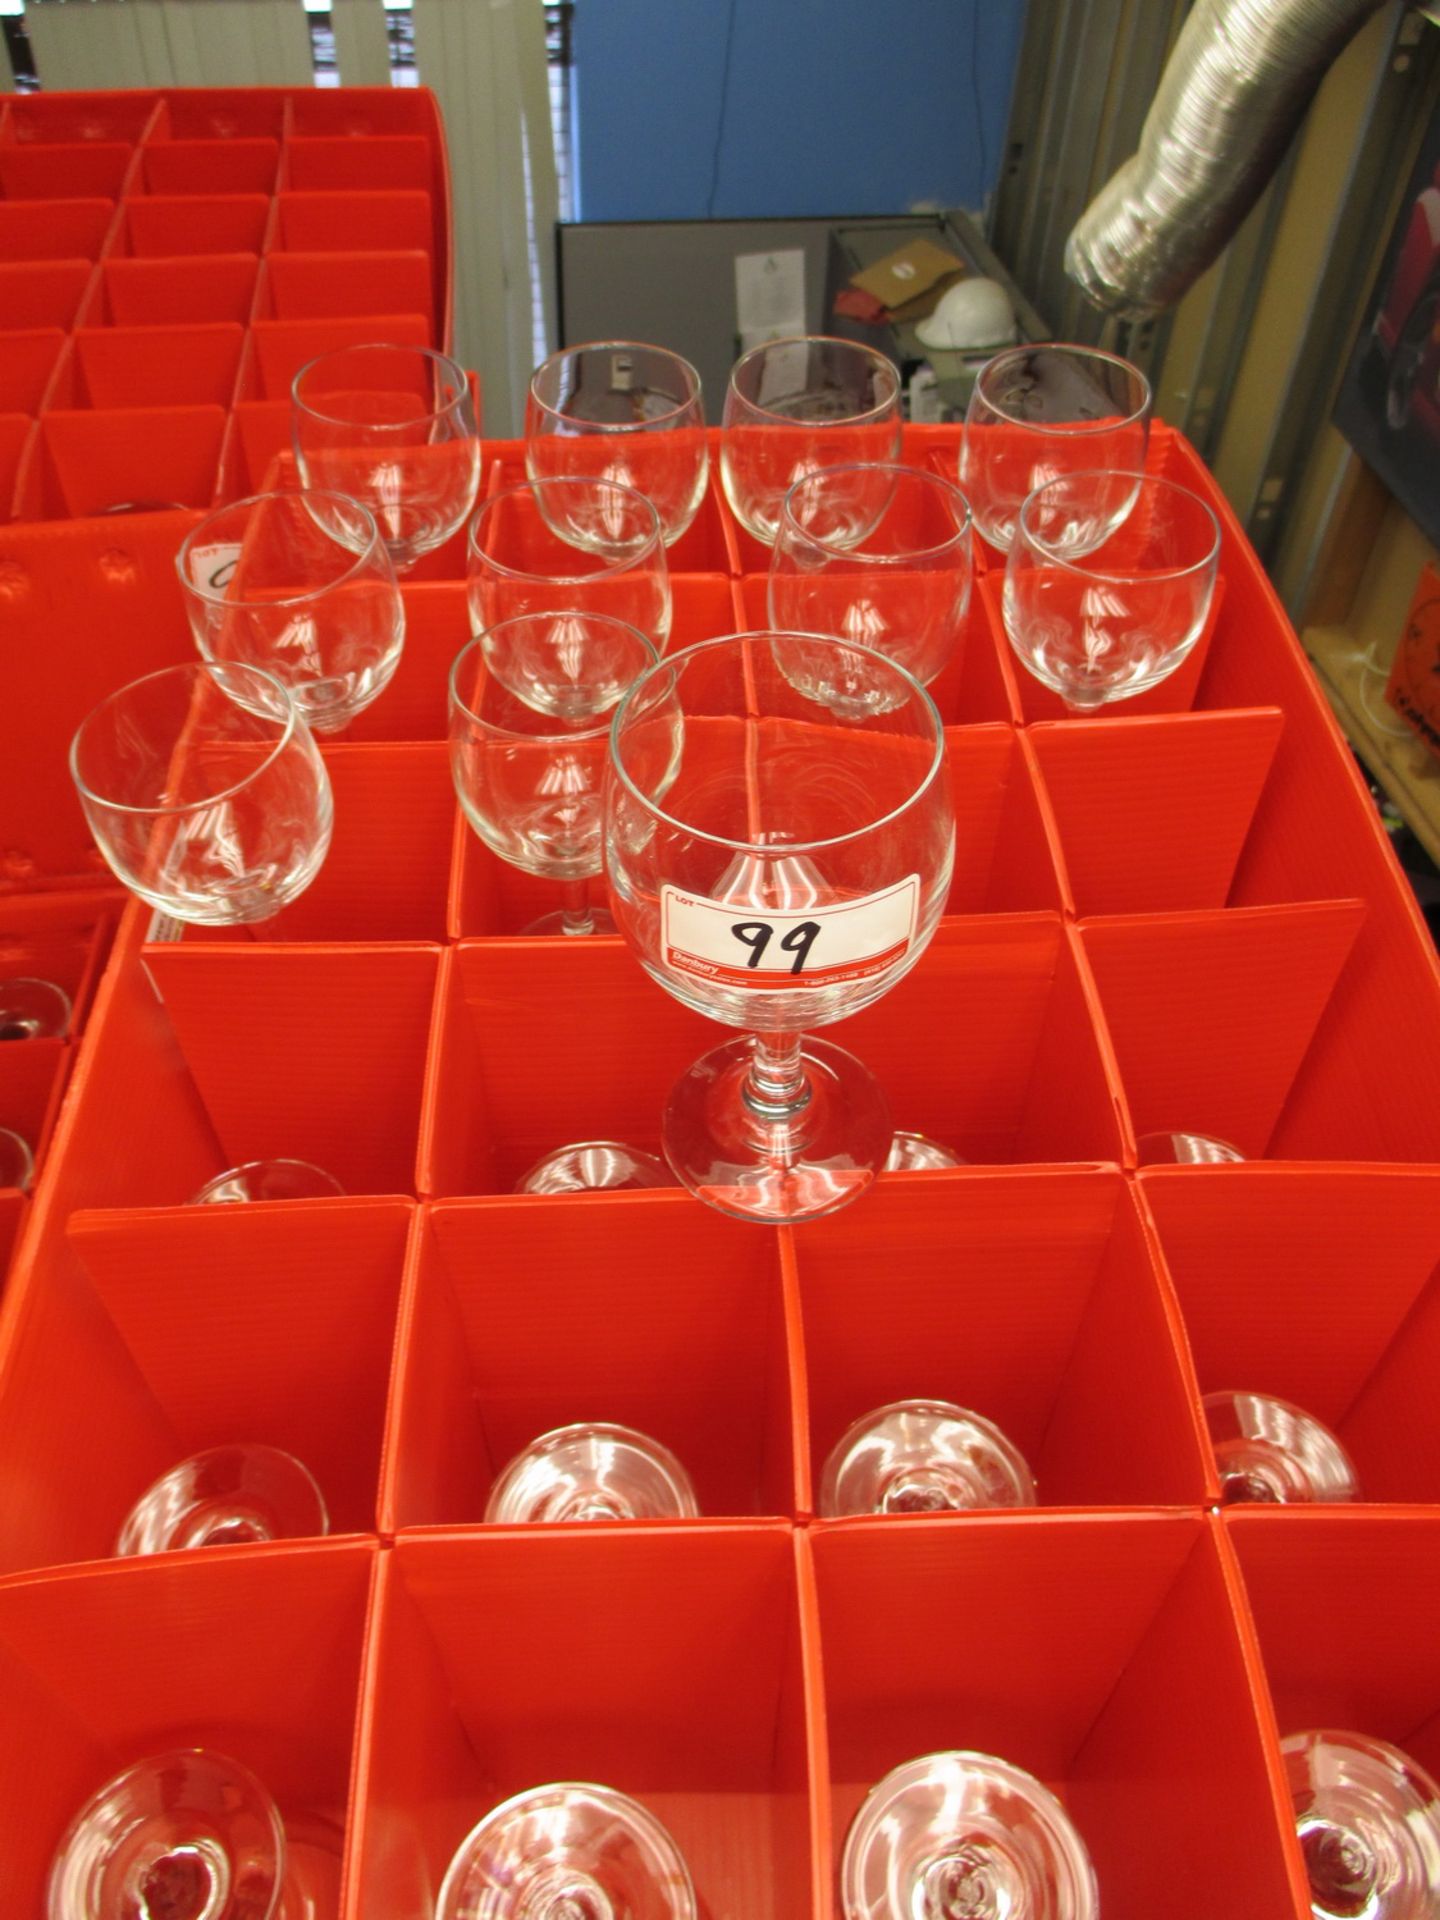 WINE 8 OZ CLEAR GLASS GLASSES (IN 2 RED COROPLAST CONTAINERS)